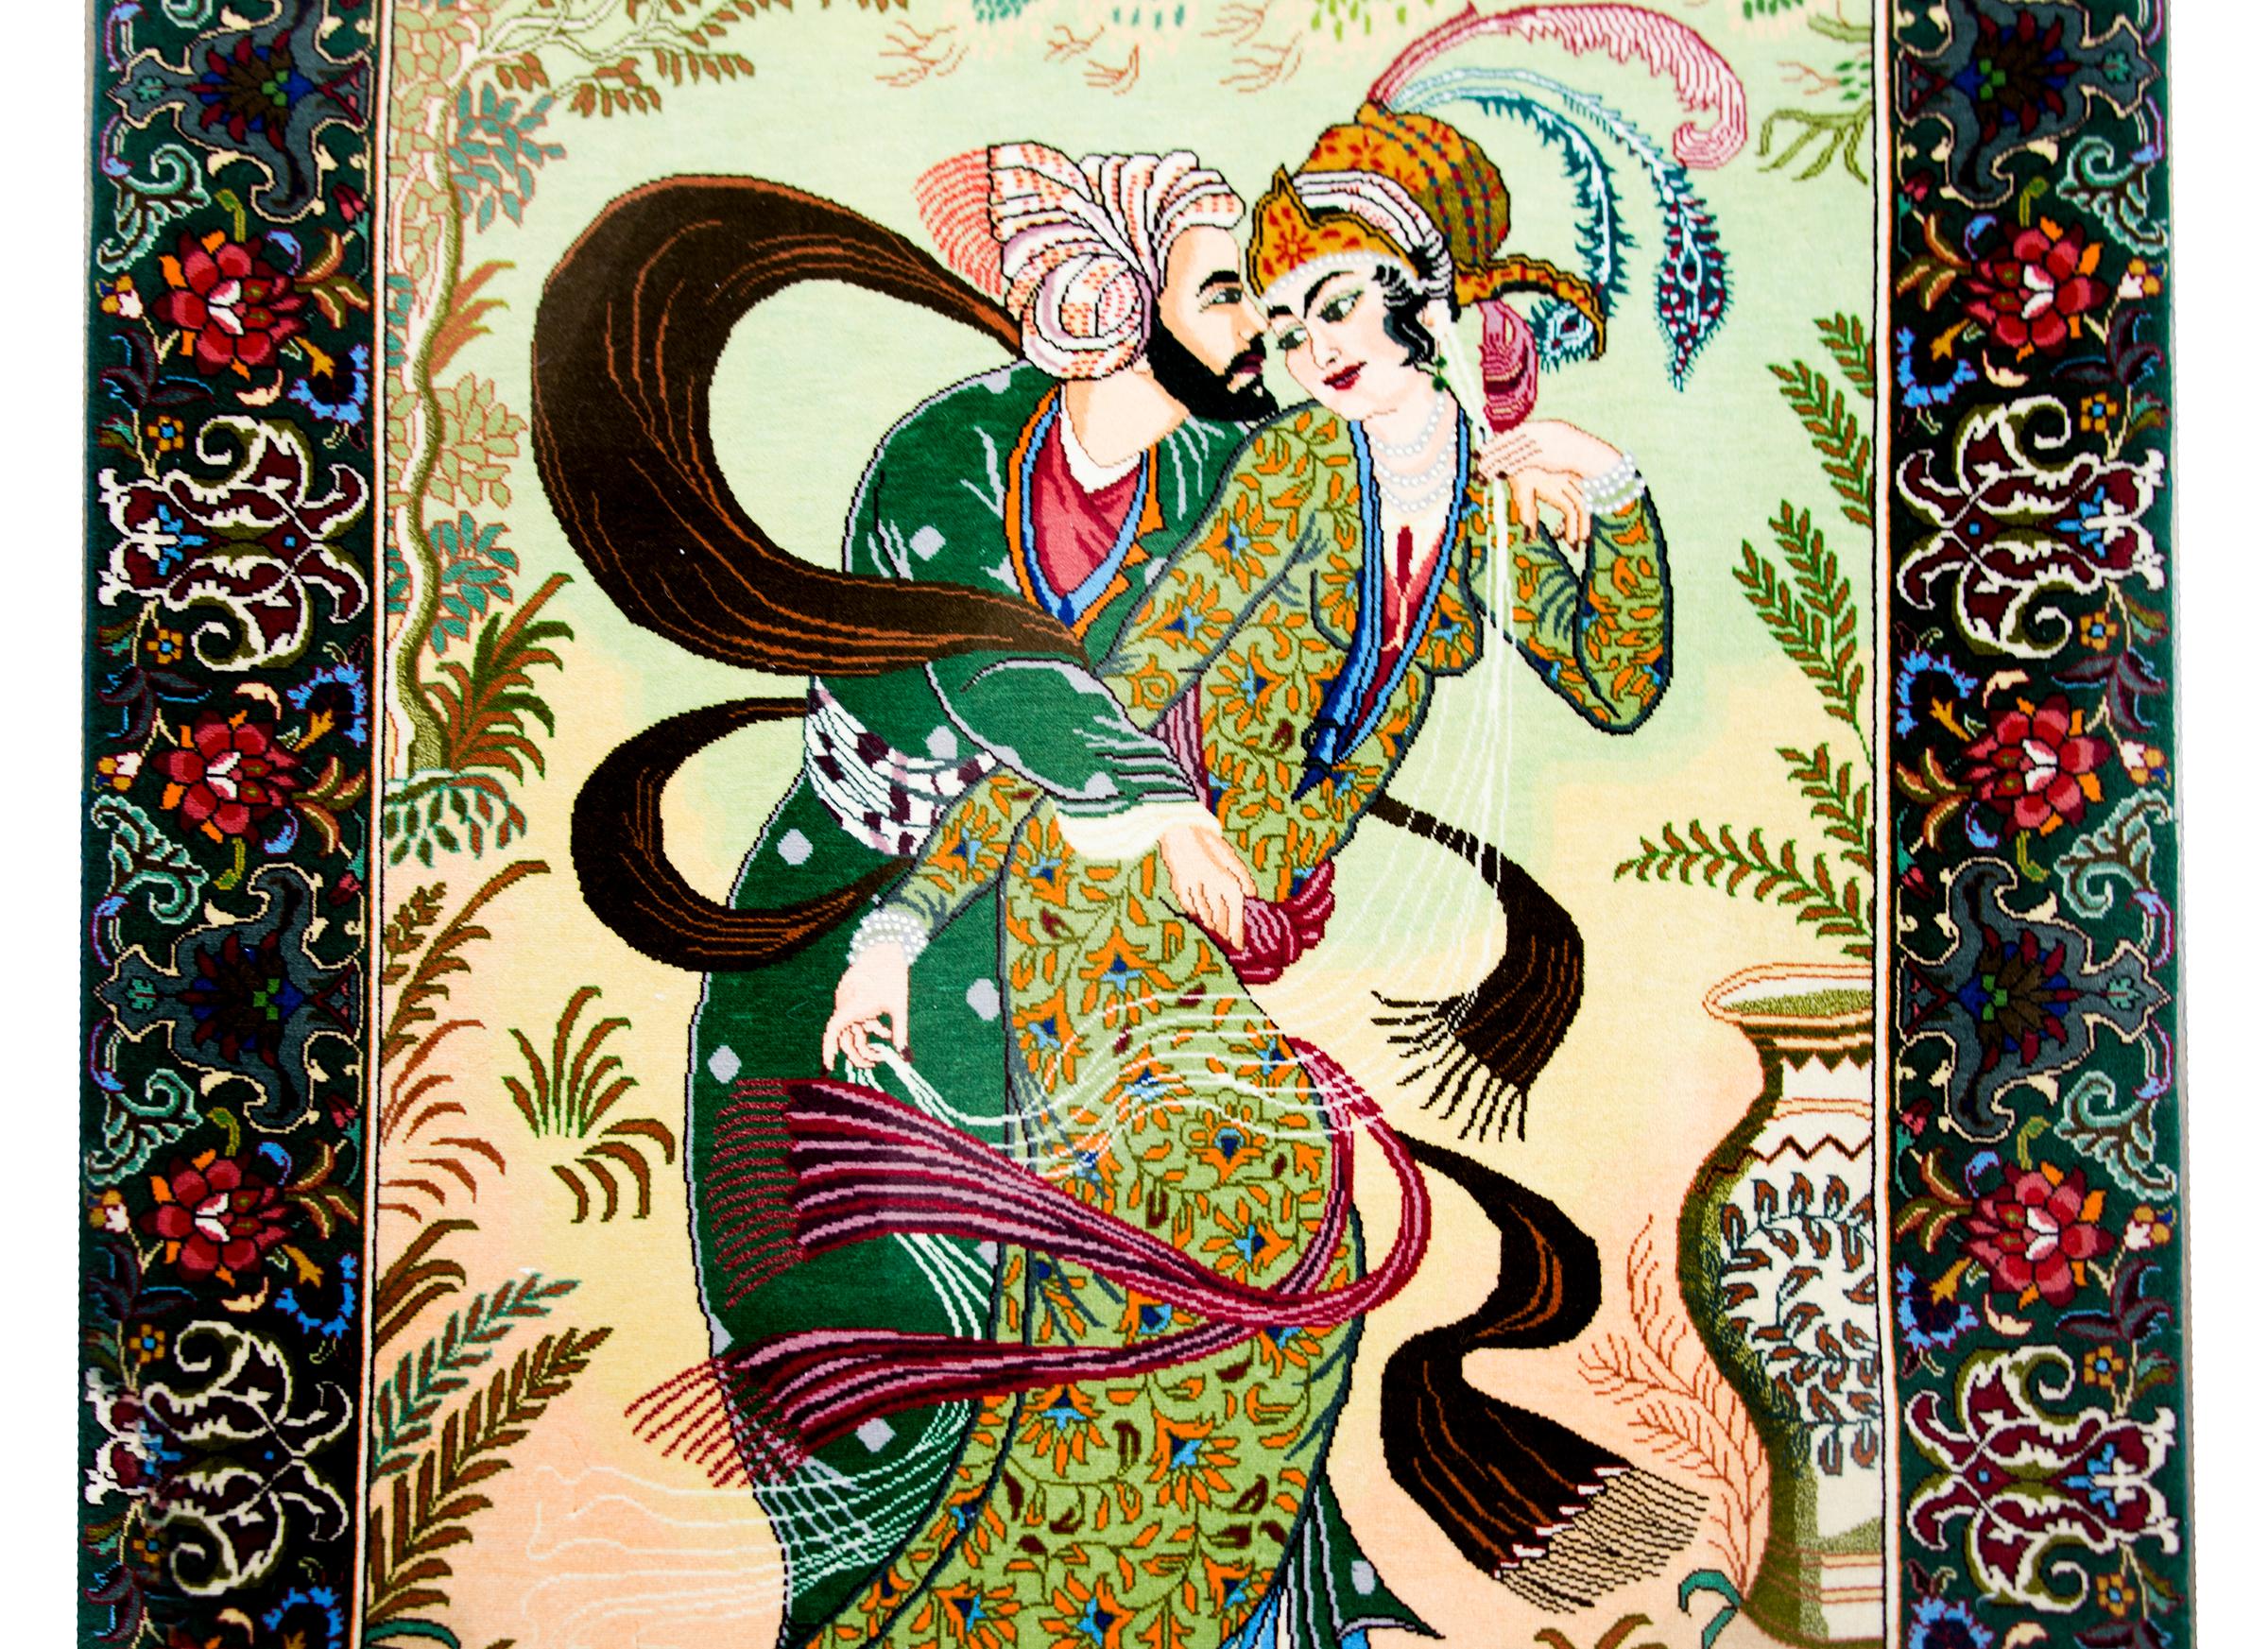 A vintage Persian Tabriz pictorial rug depicting a couple embracing with feathers, scarves, and ferns swirling around them, and surrounded by a wide floral and leaf patterned border.